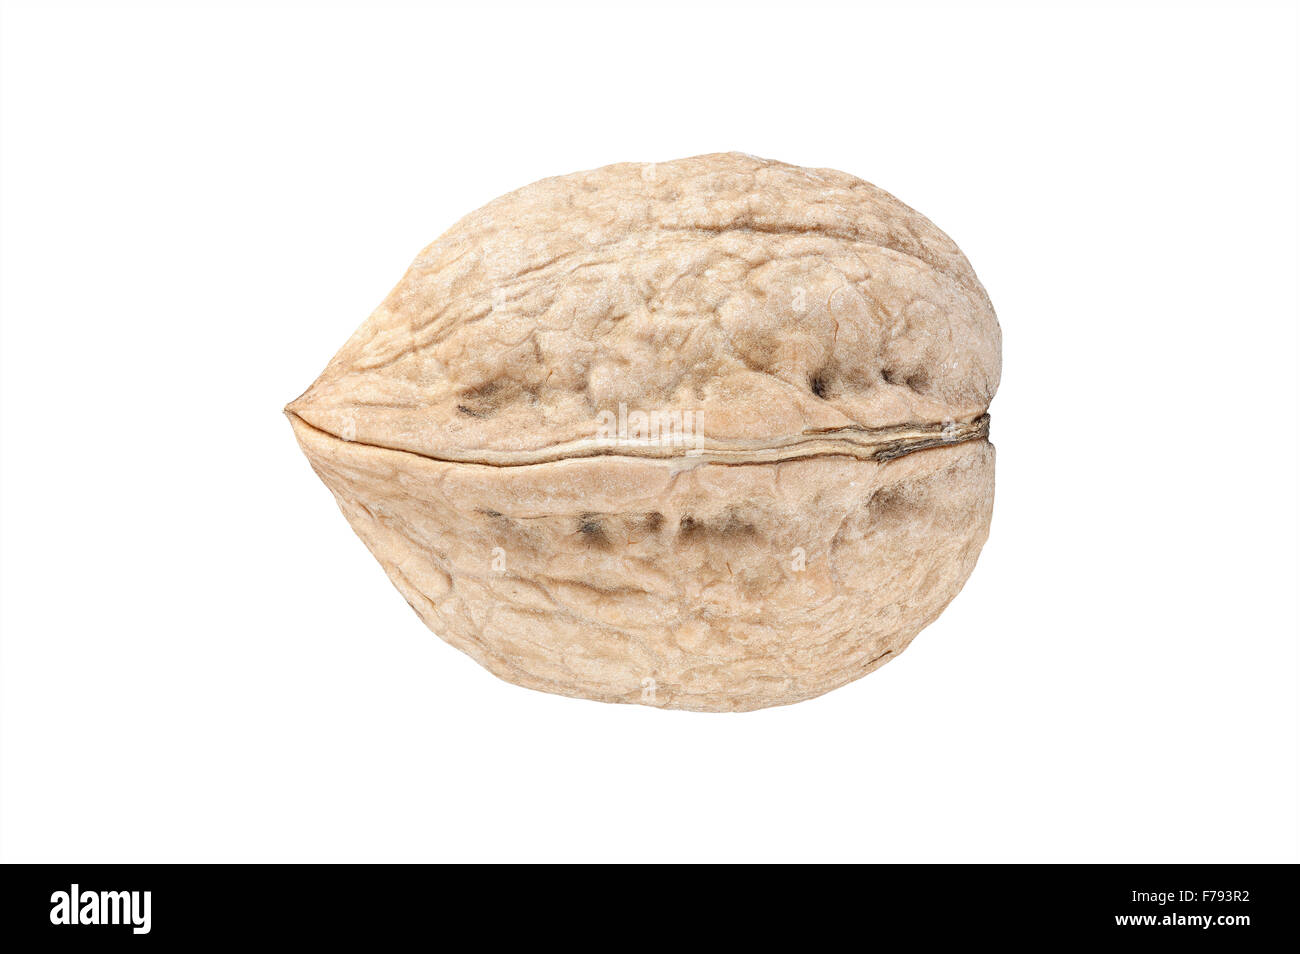 High quality close up picture of walnut isolated on white. Stock Photo